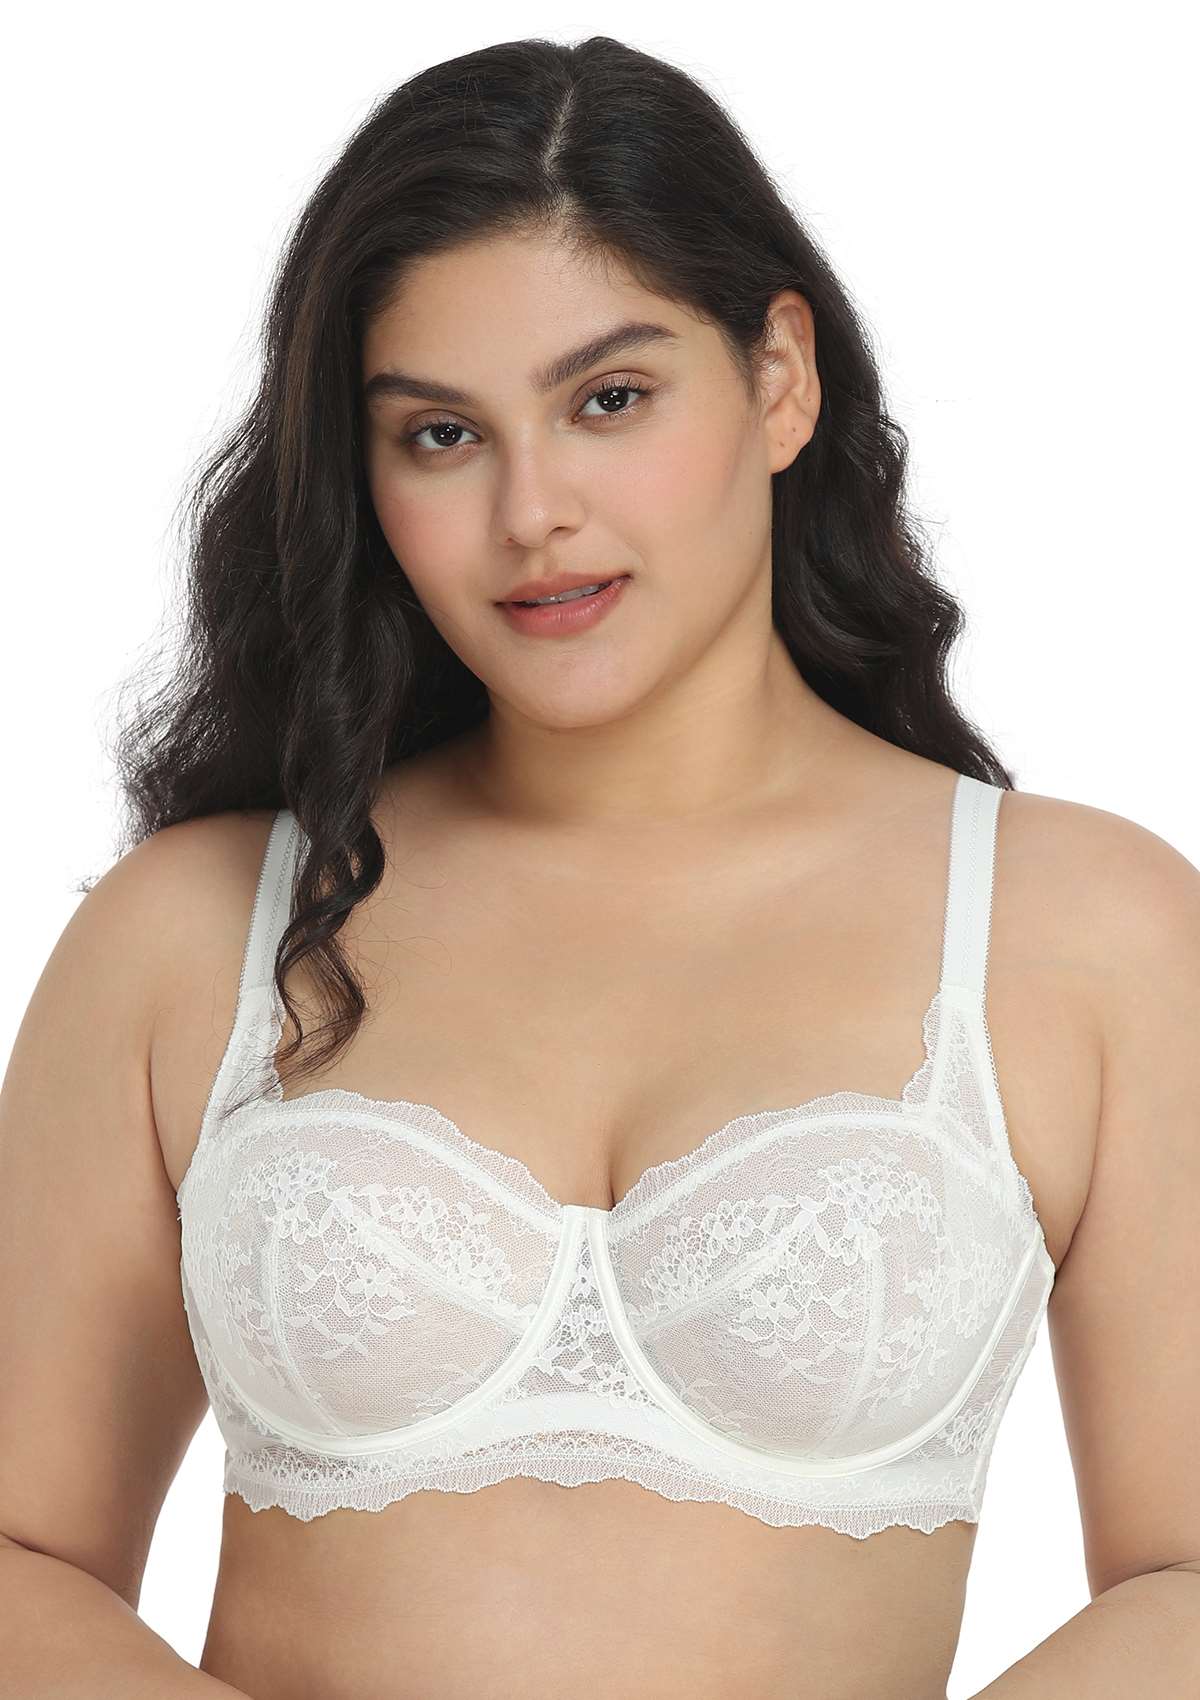 HSIA I Do Floral Lace Bridal Balconette Beautiful Bra For Special Day - White / 36 / D